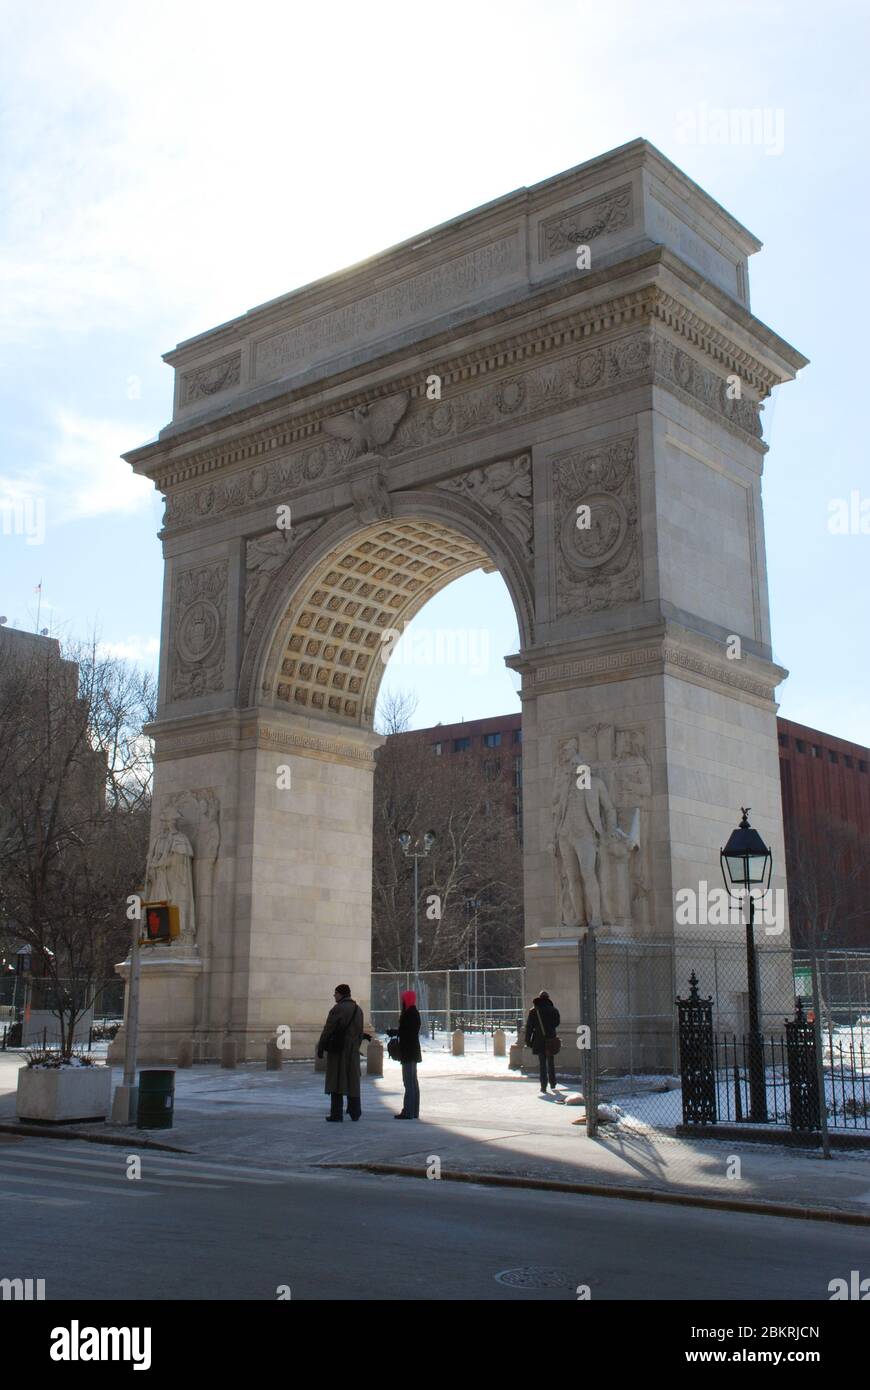 Marble Roman Arch Washington Square Arch, New York, NY 10012, United States by Stanford White Stock Photo